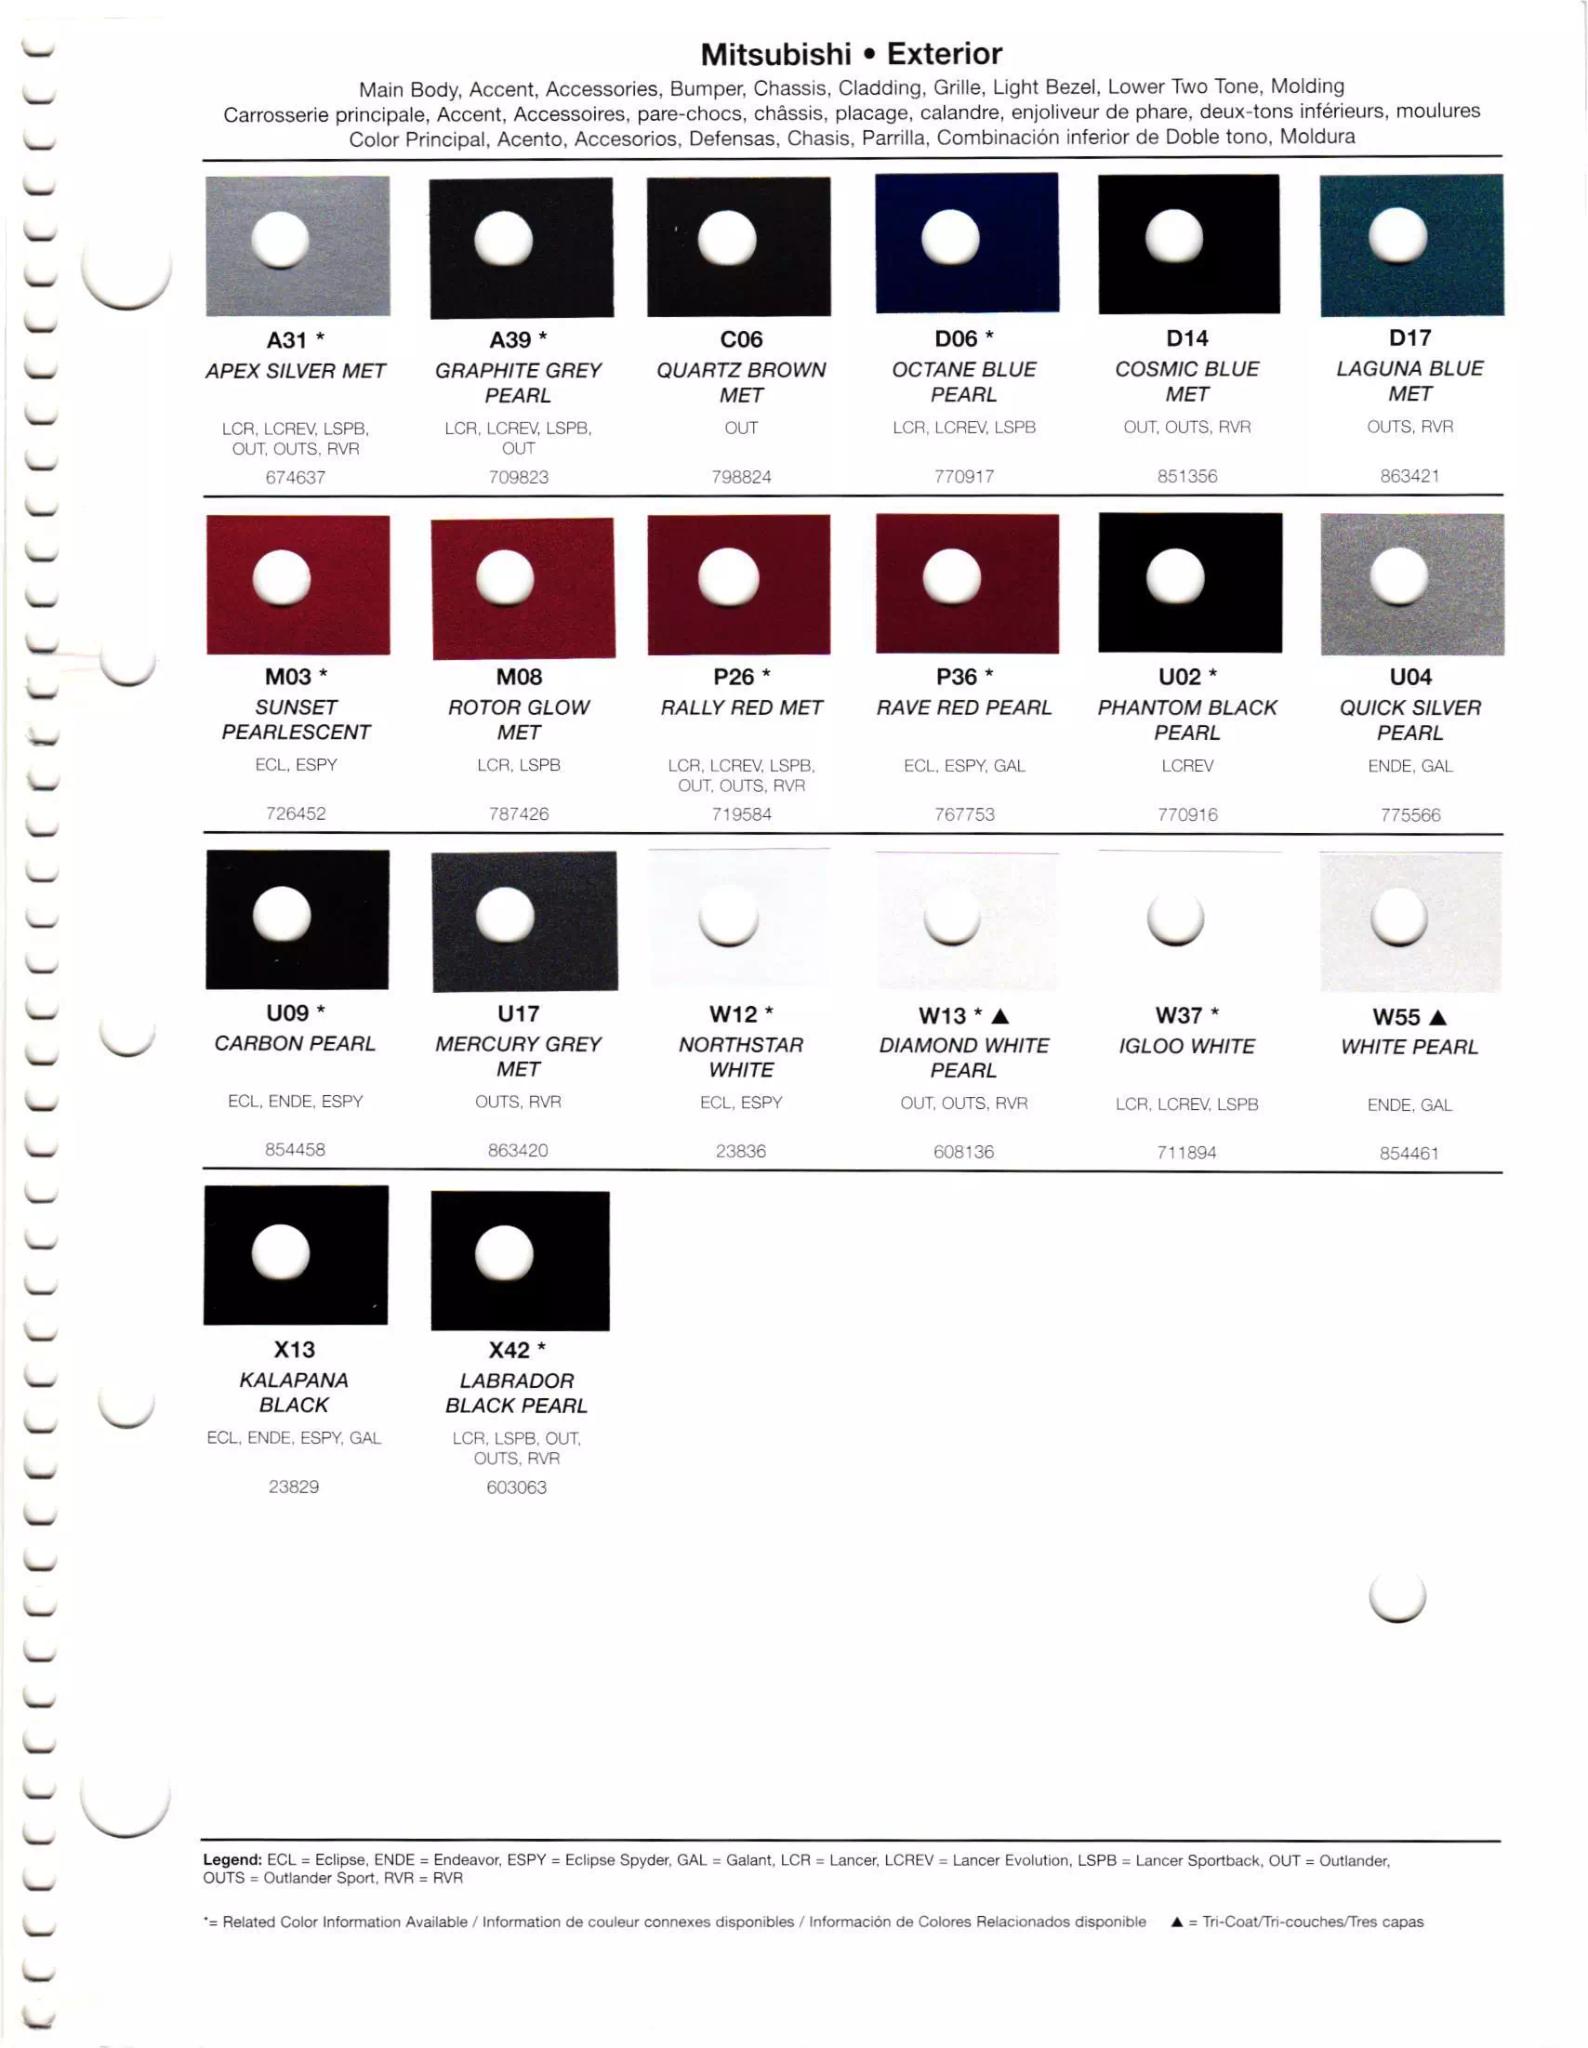 a color chart showing 2011 Mitsubishi exterior paint codes, and their color names.